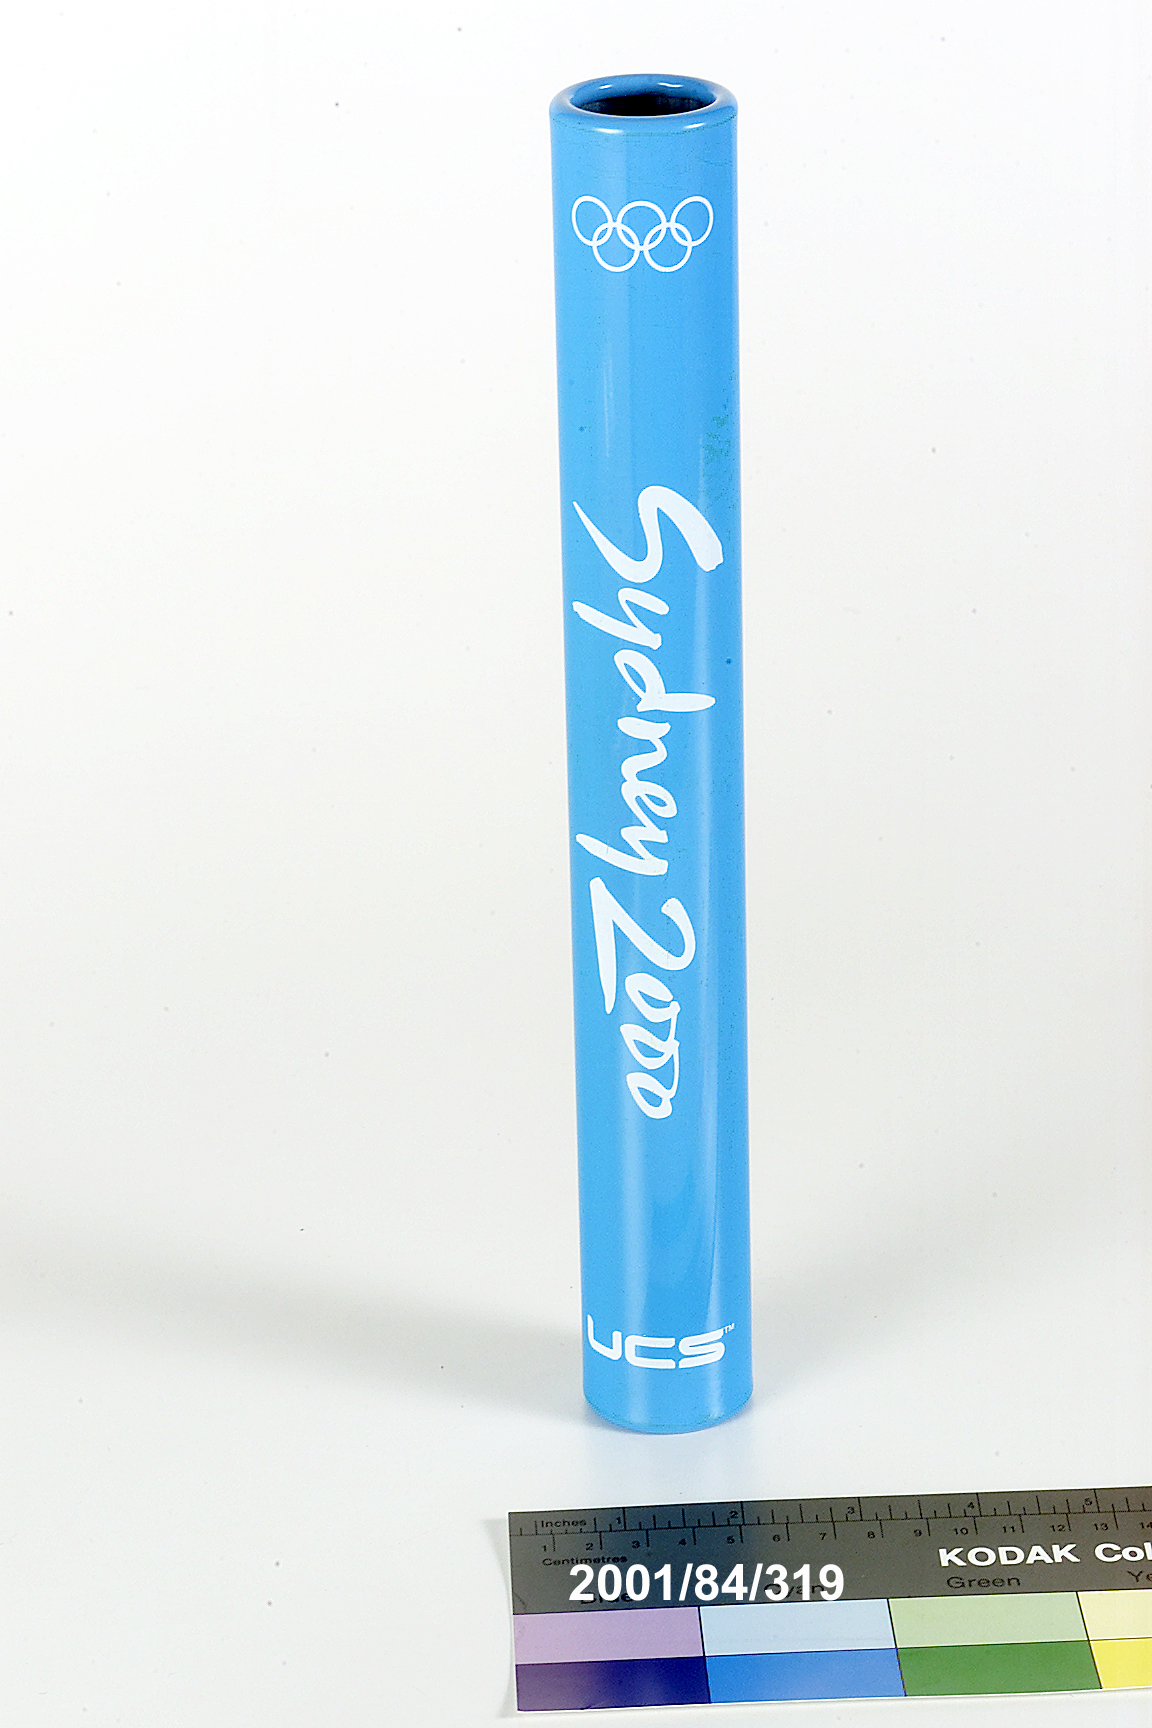 Relay batons made for the Sydney 2000 Olympic Games